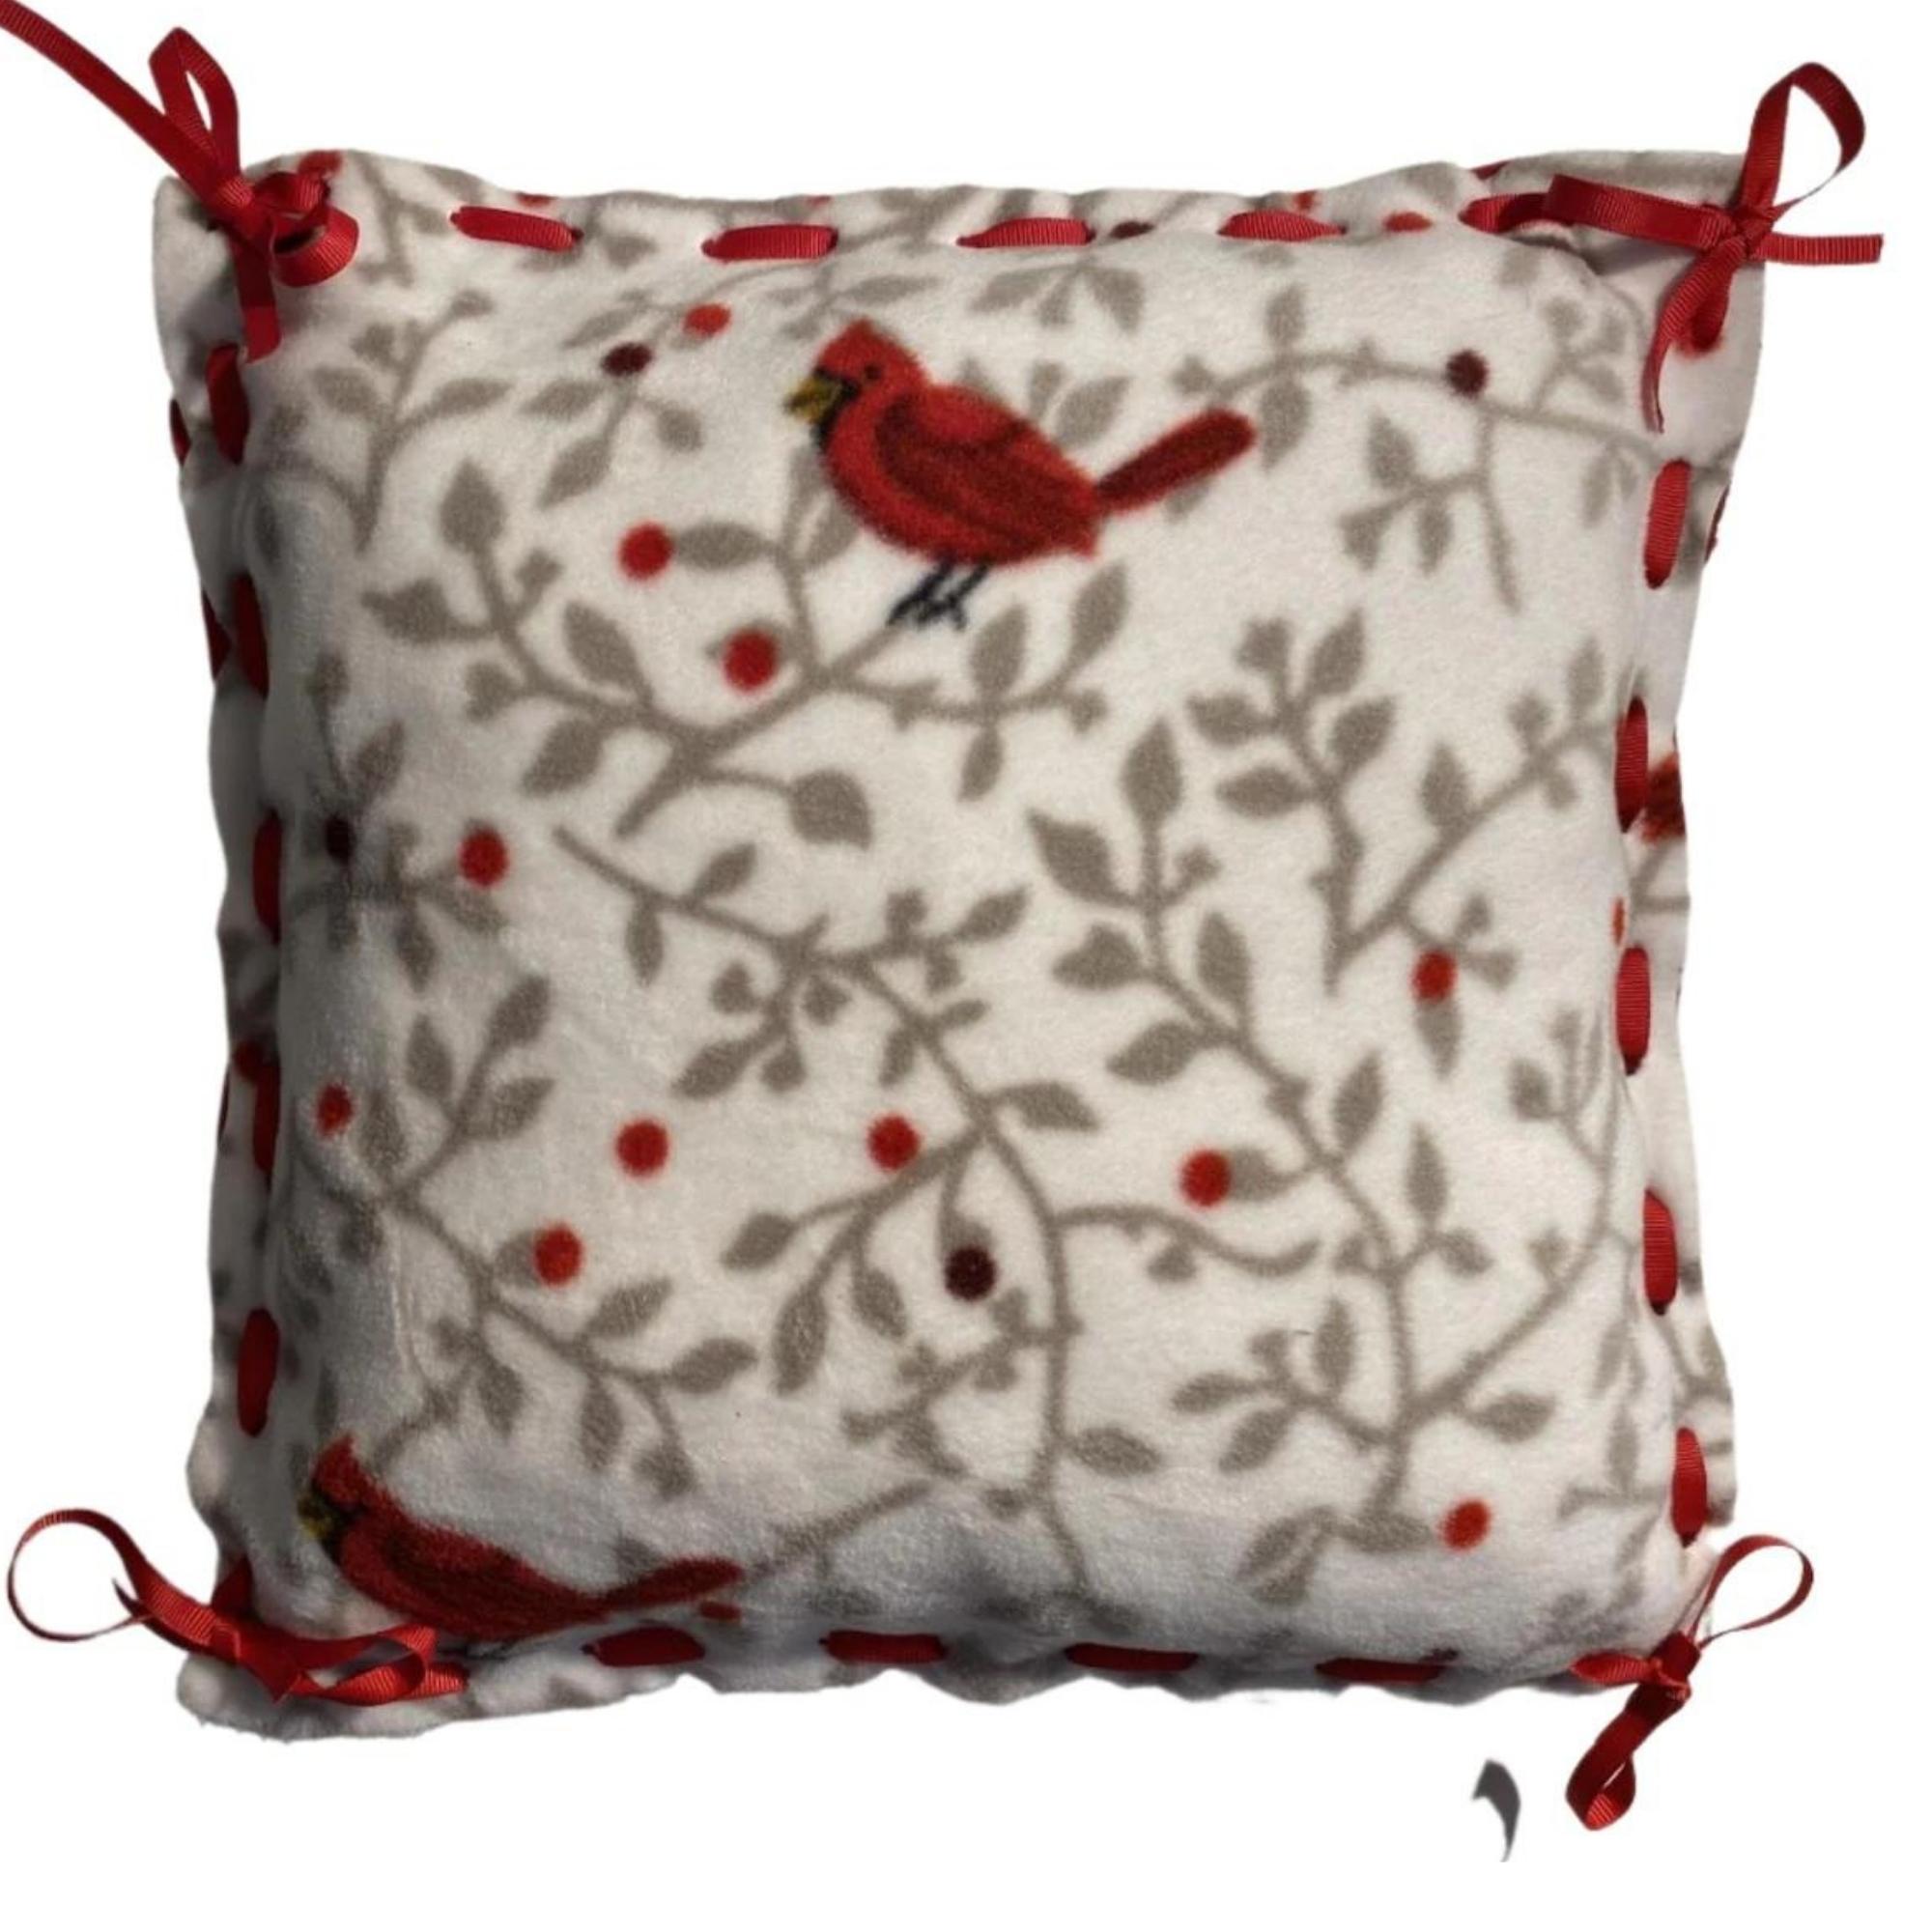 Cardinals on branches with red holly berries fleece pillow kit